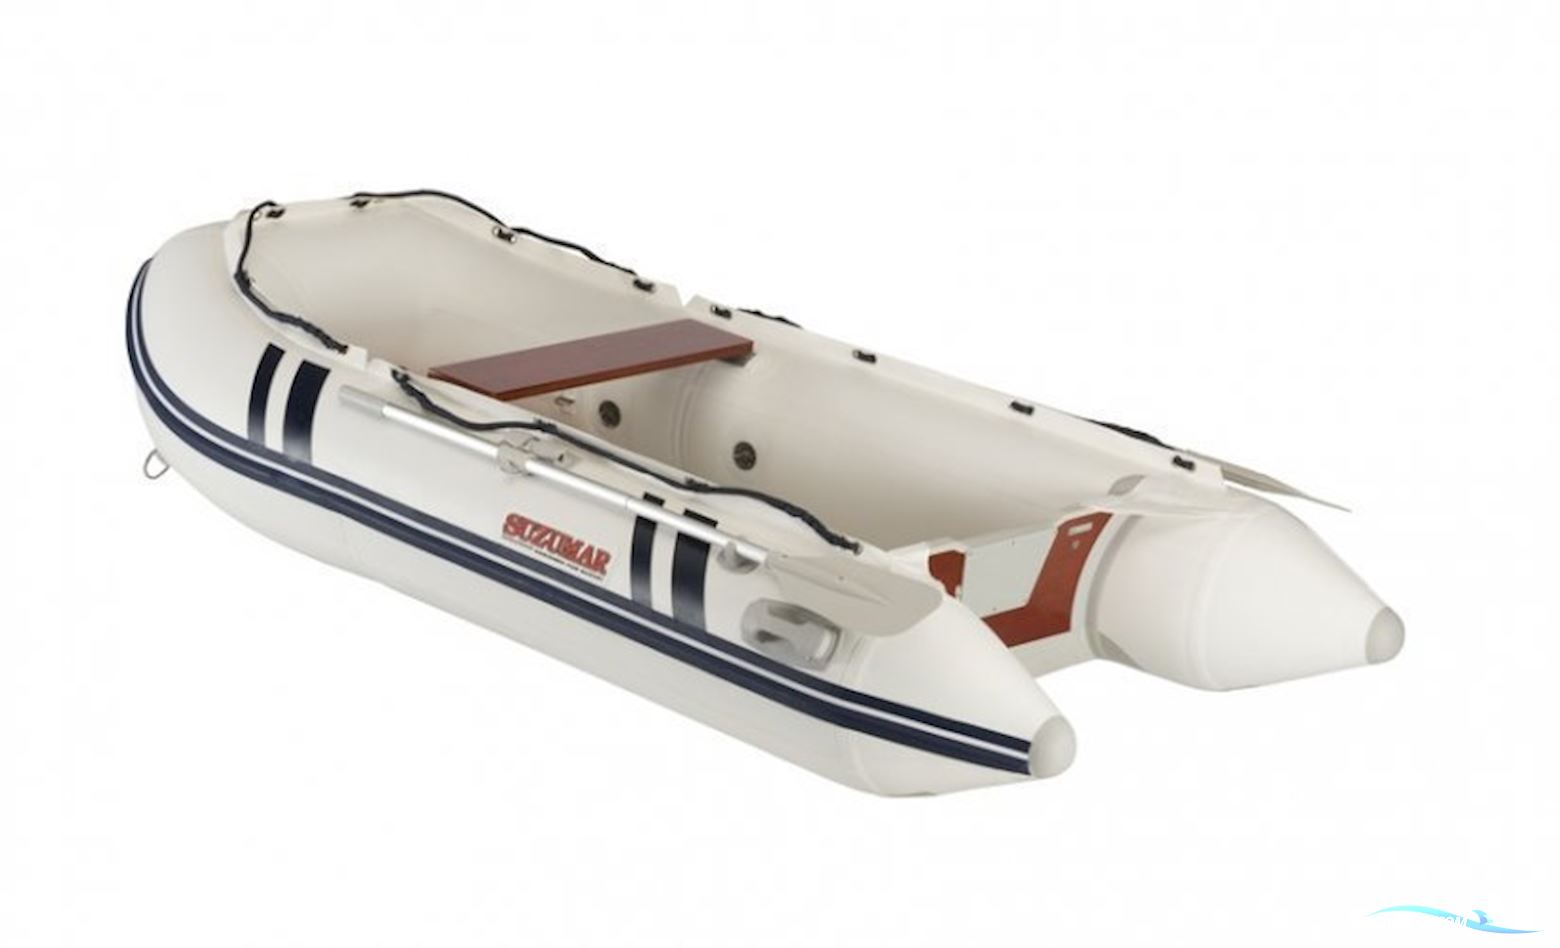 Suzumar DS 290 Alu Inflatable / Rib 2023, The Netherlands